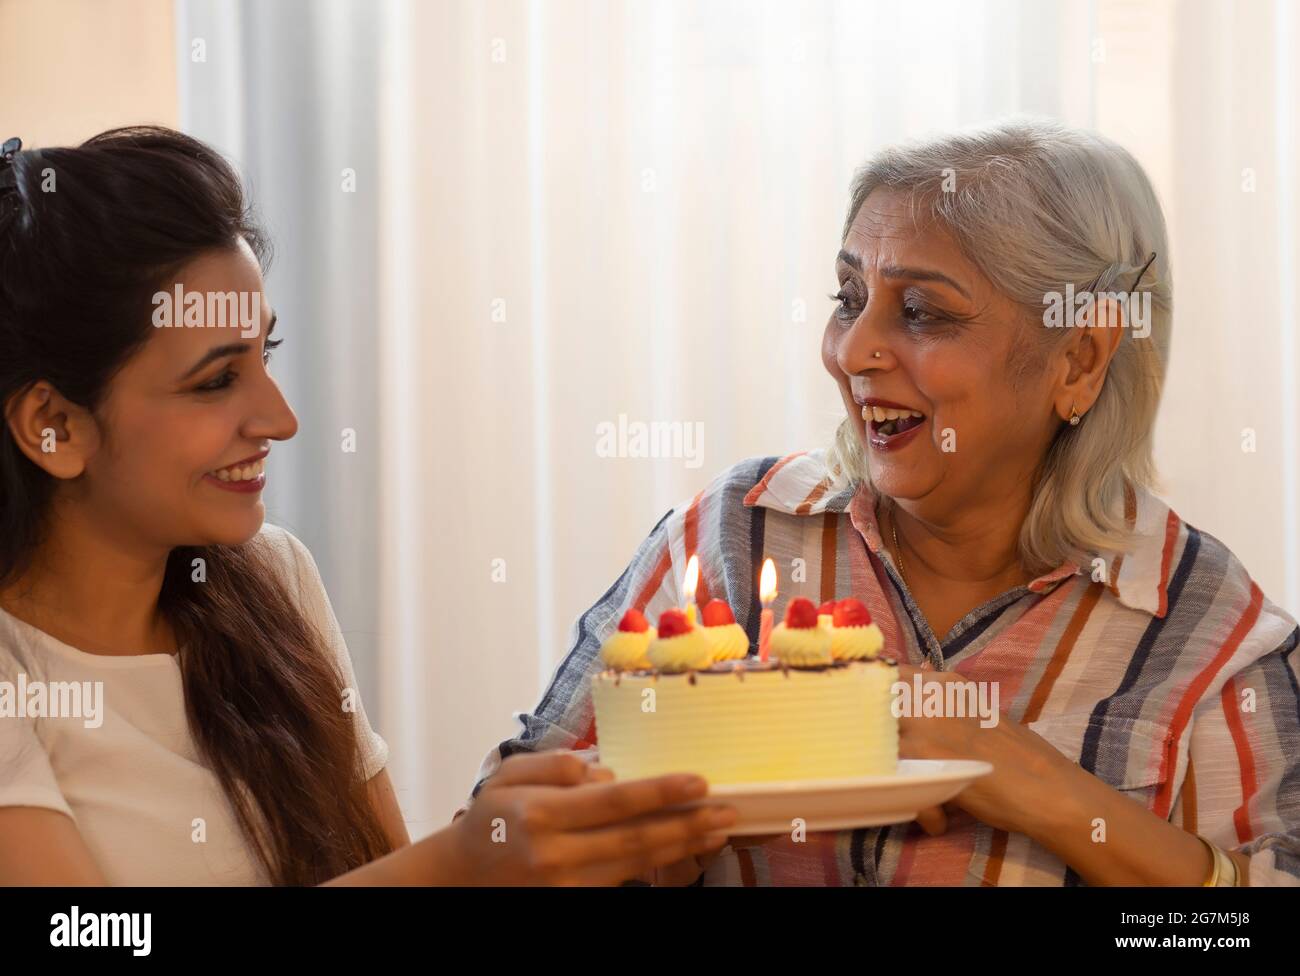 A YOUNG DAUGHTER PRESENTING MOTHER WITH A CAKE Stock Photo